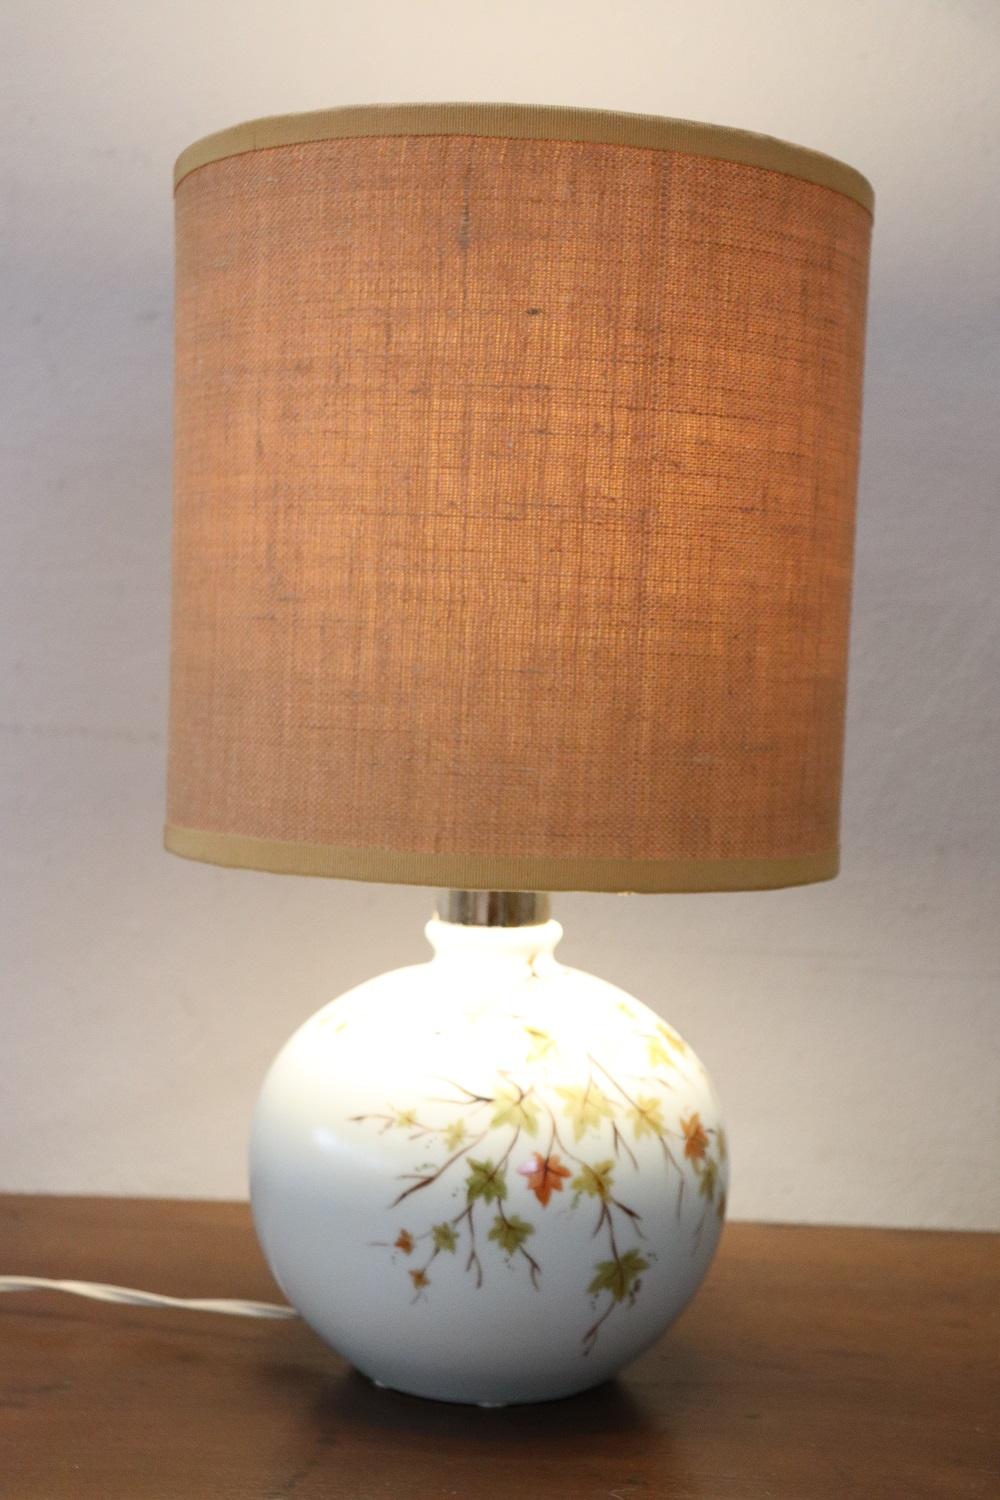 Beautiful table lamp vintage Italian manufacture. Beautiful floral hand painted decoration. Small defect in the lampshade, see photos.